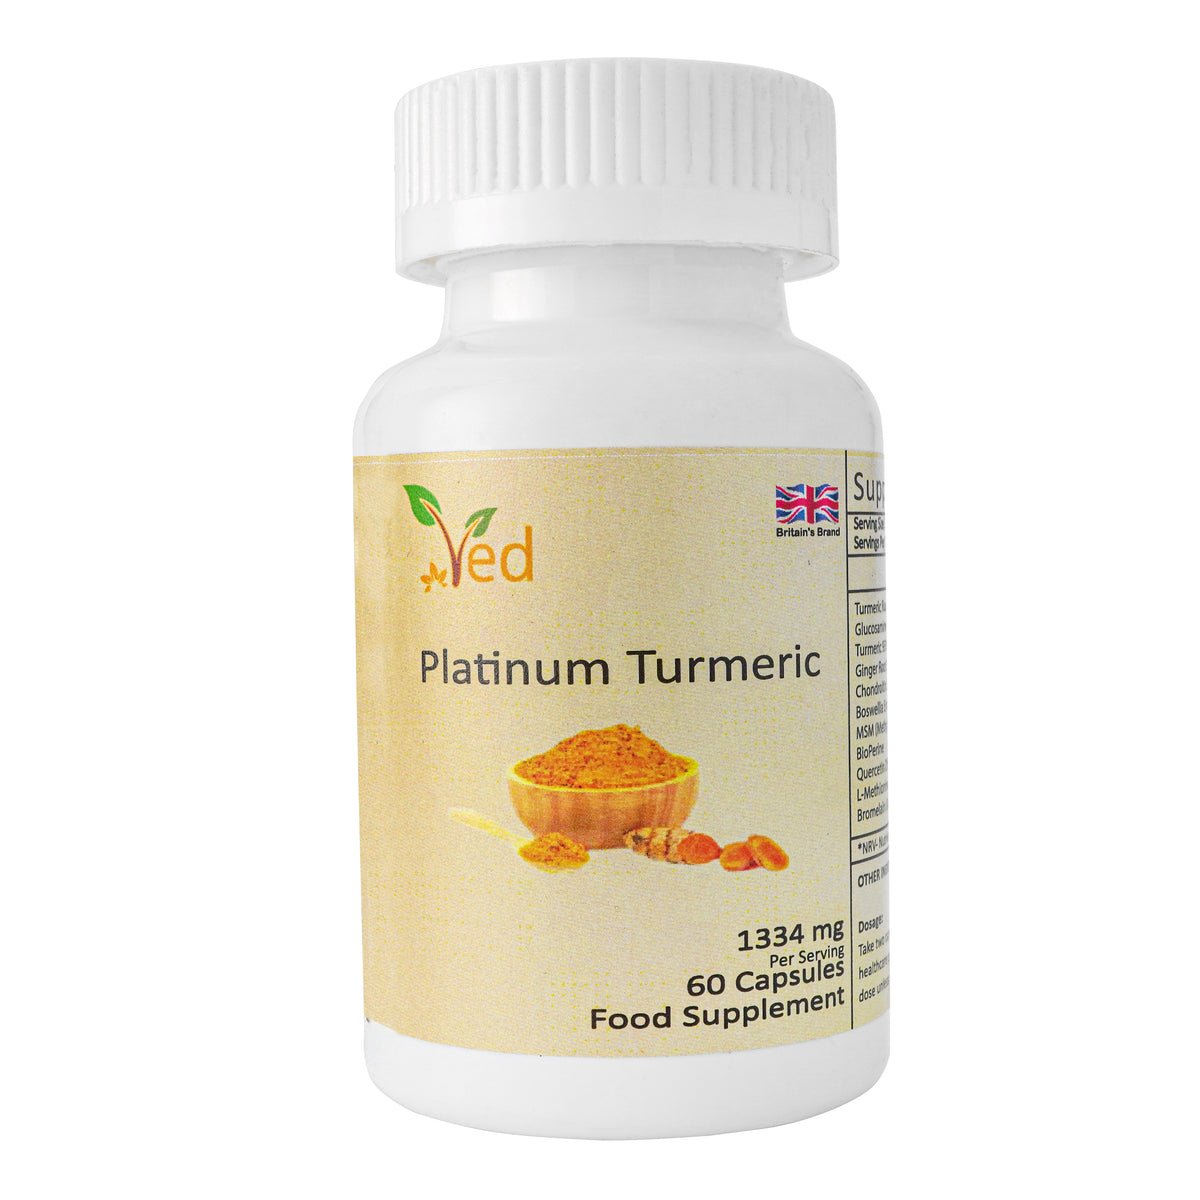 Ved Platinum Turmeric- Double Dose of Curcuma Longa with Ginger Root & Boswellia Extract, All-Natural Ingredients, 1333 mg per serving, 60 Capsules(30 days supply)